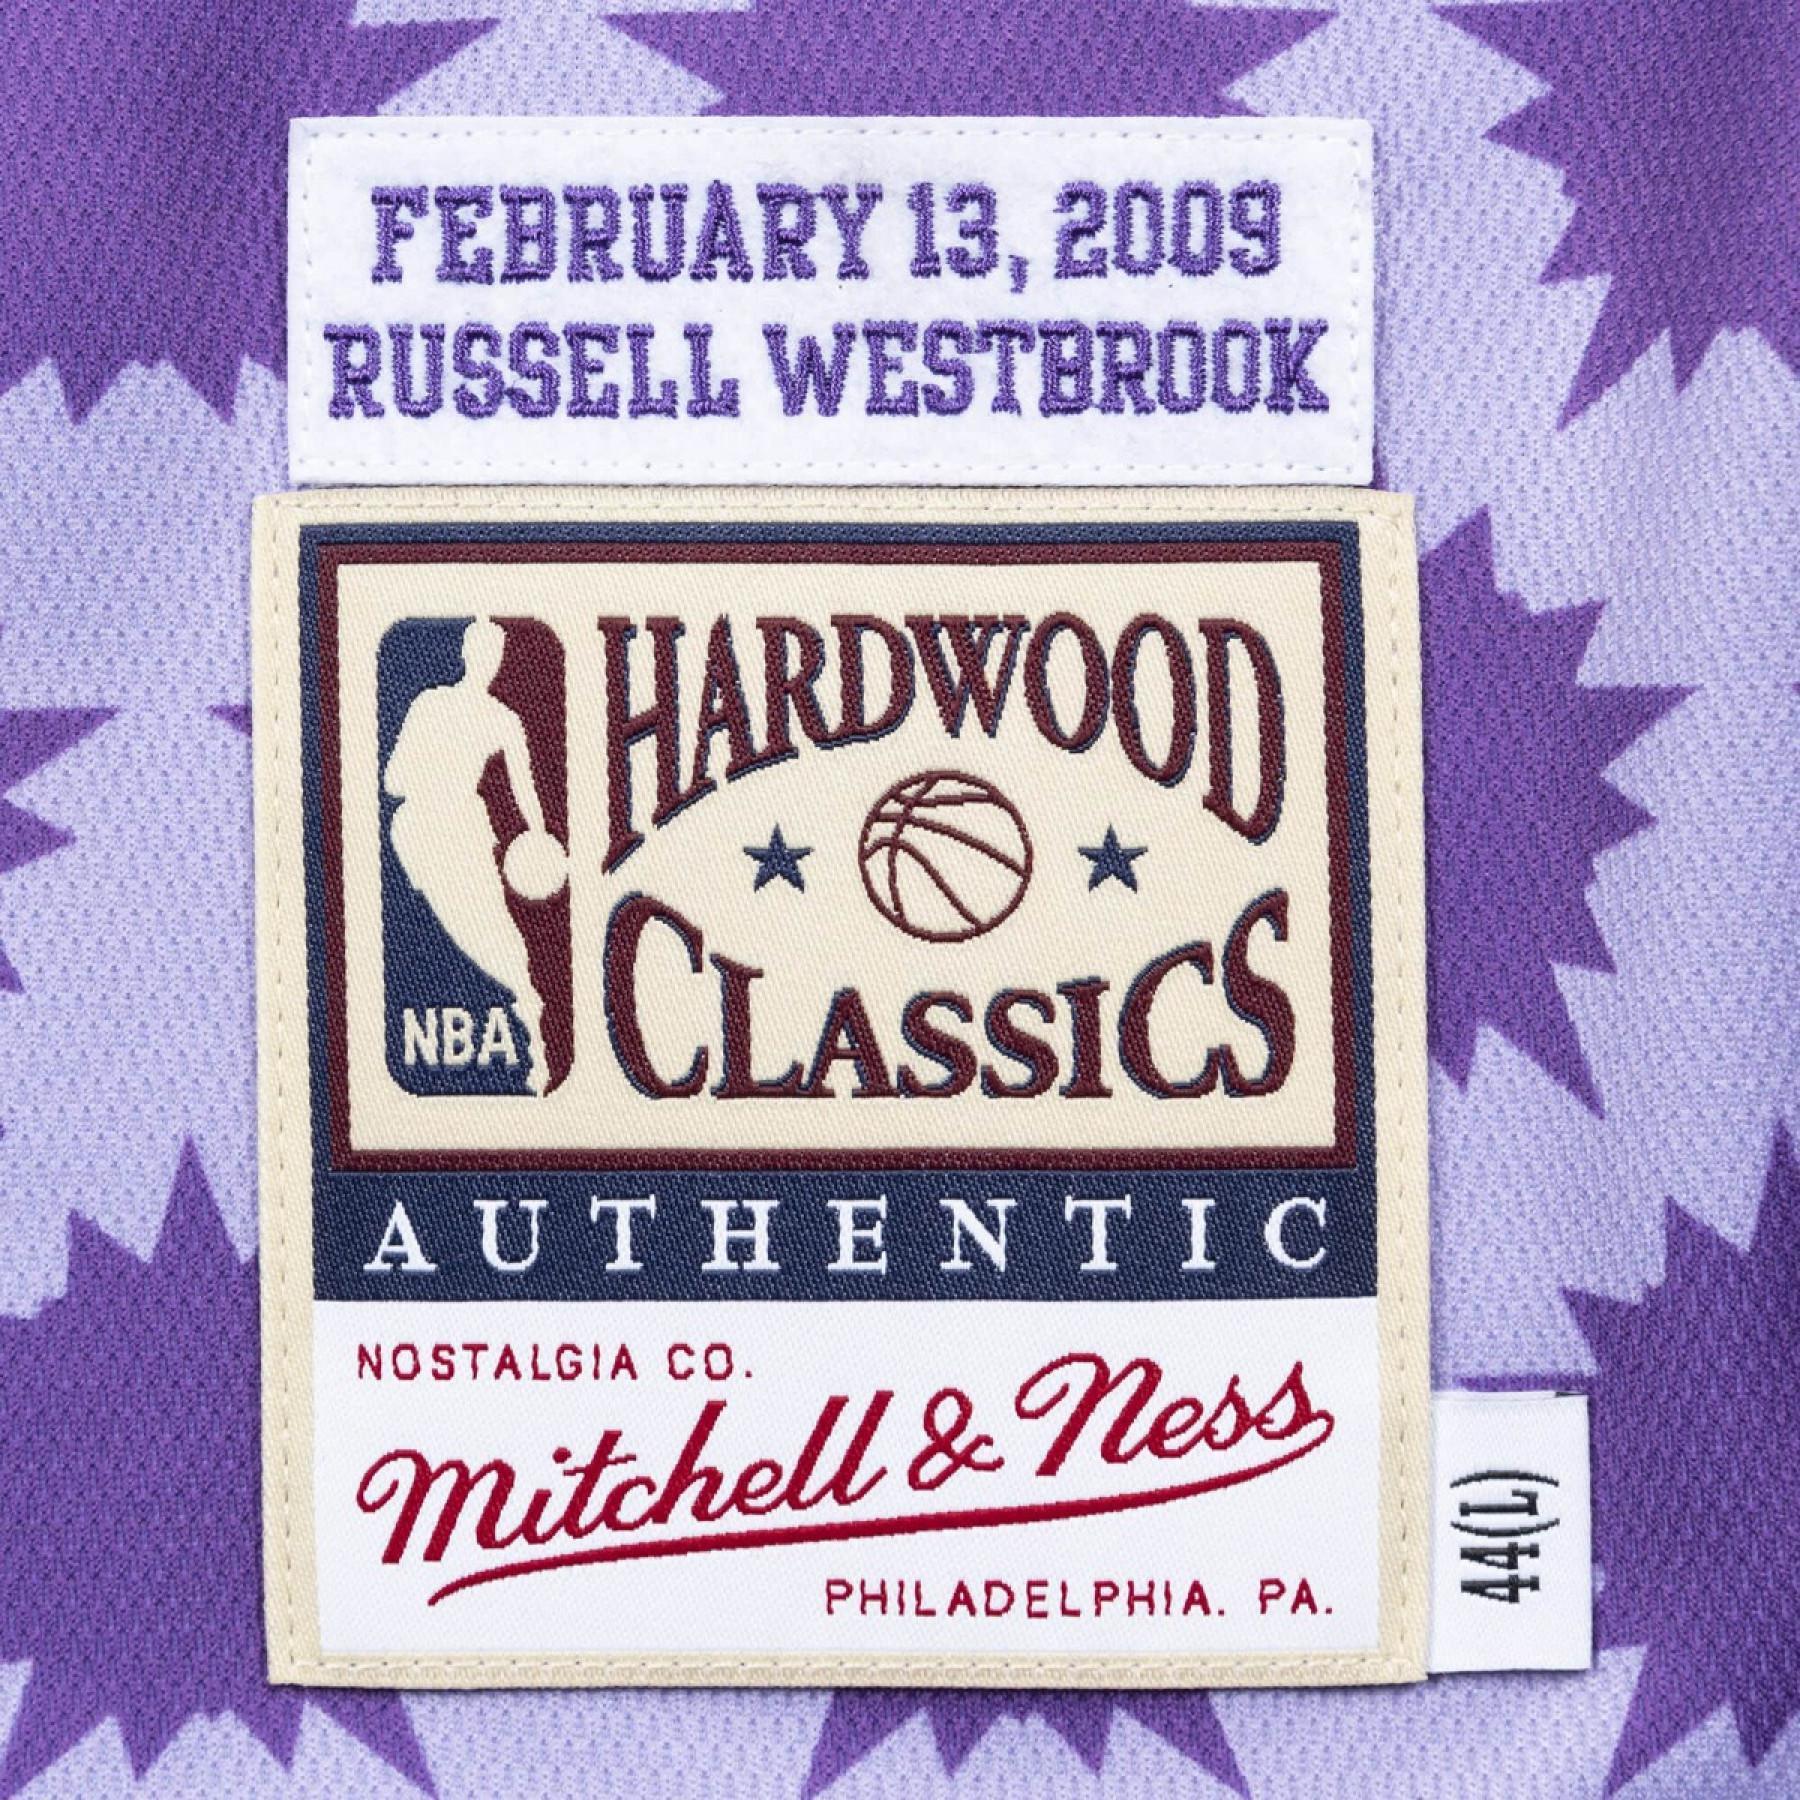 Authentic nba jersey russell westbrook rookie gioco 2009